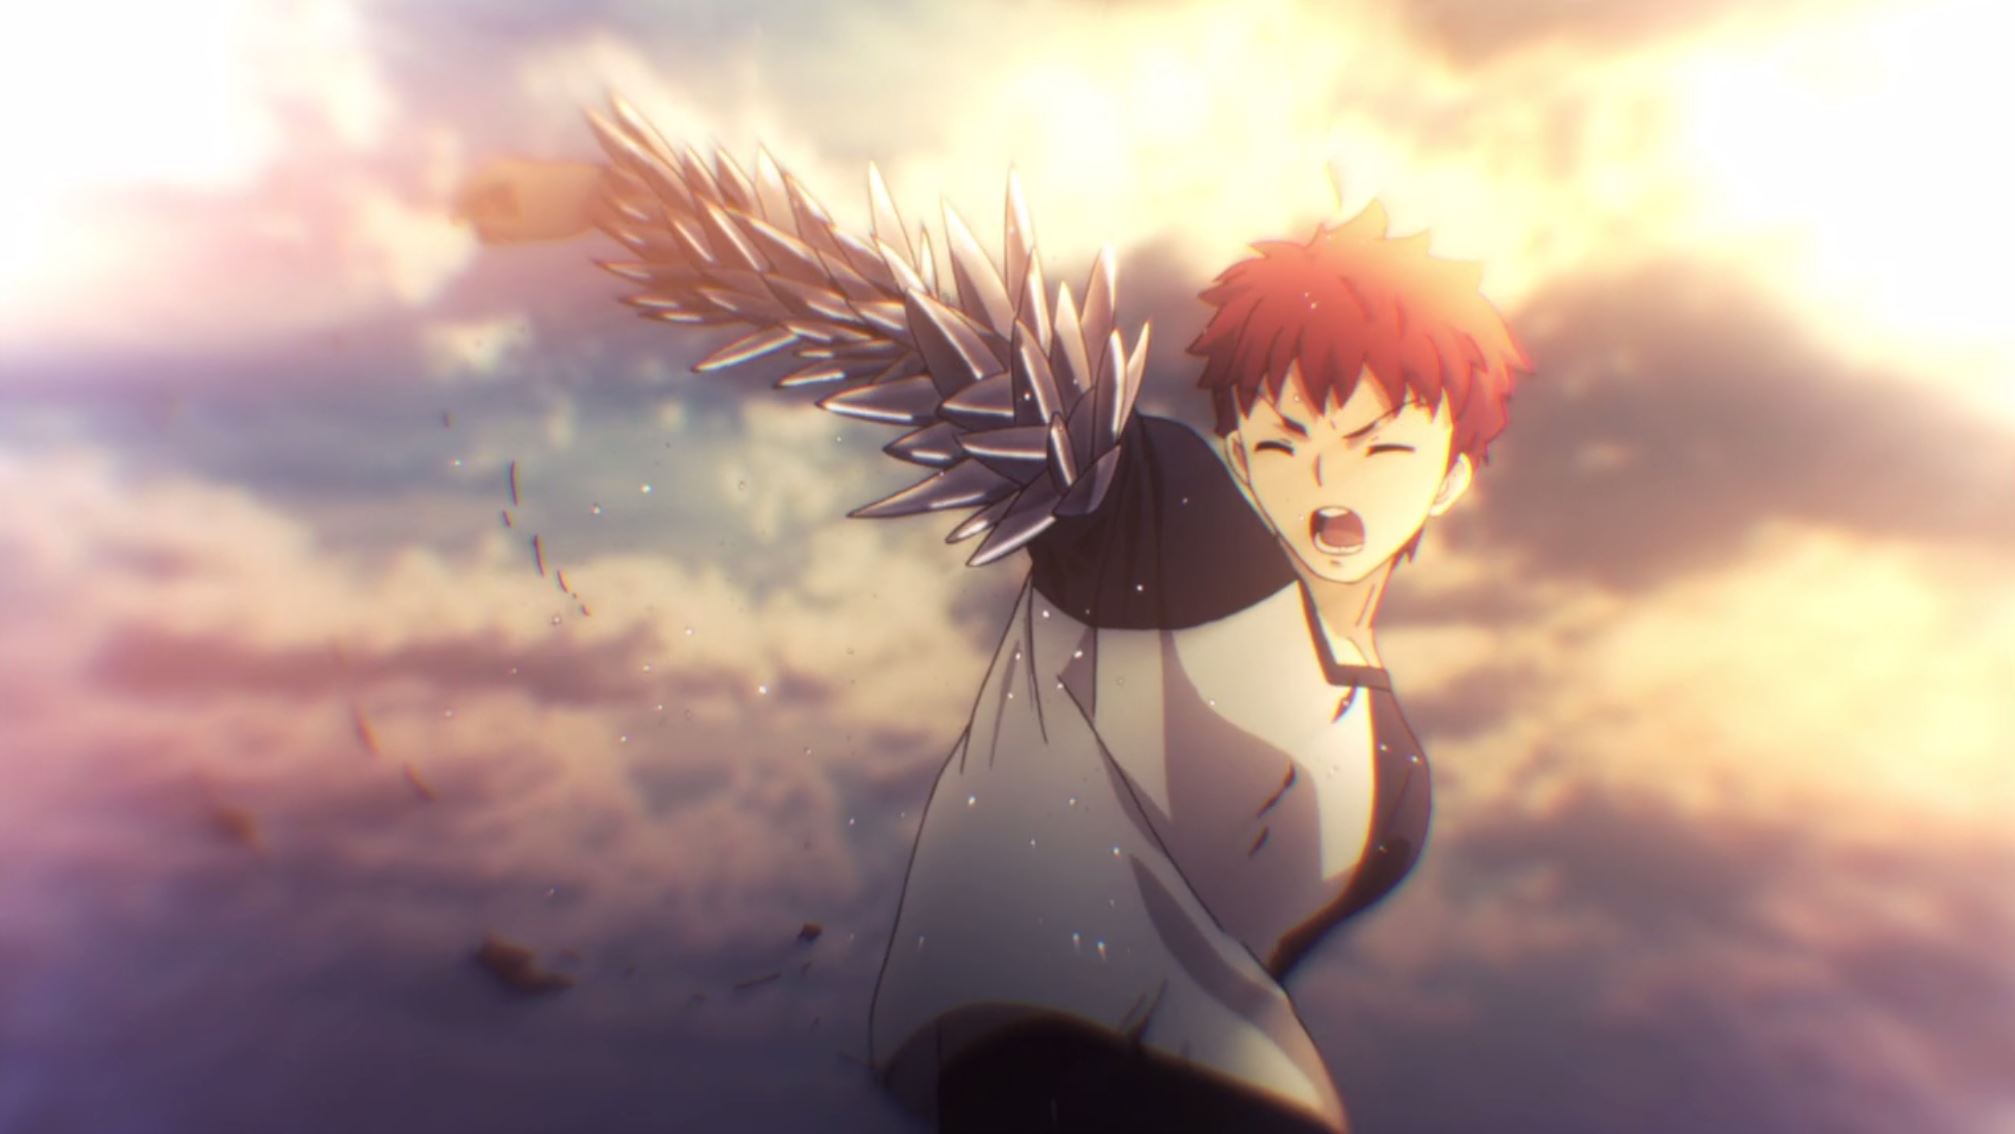  1134 in Fate Stay Night Unlimited Blade Works Episode 8 Thoughts 2015x1134